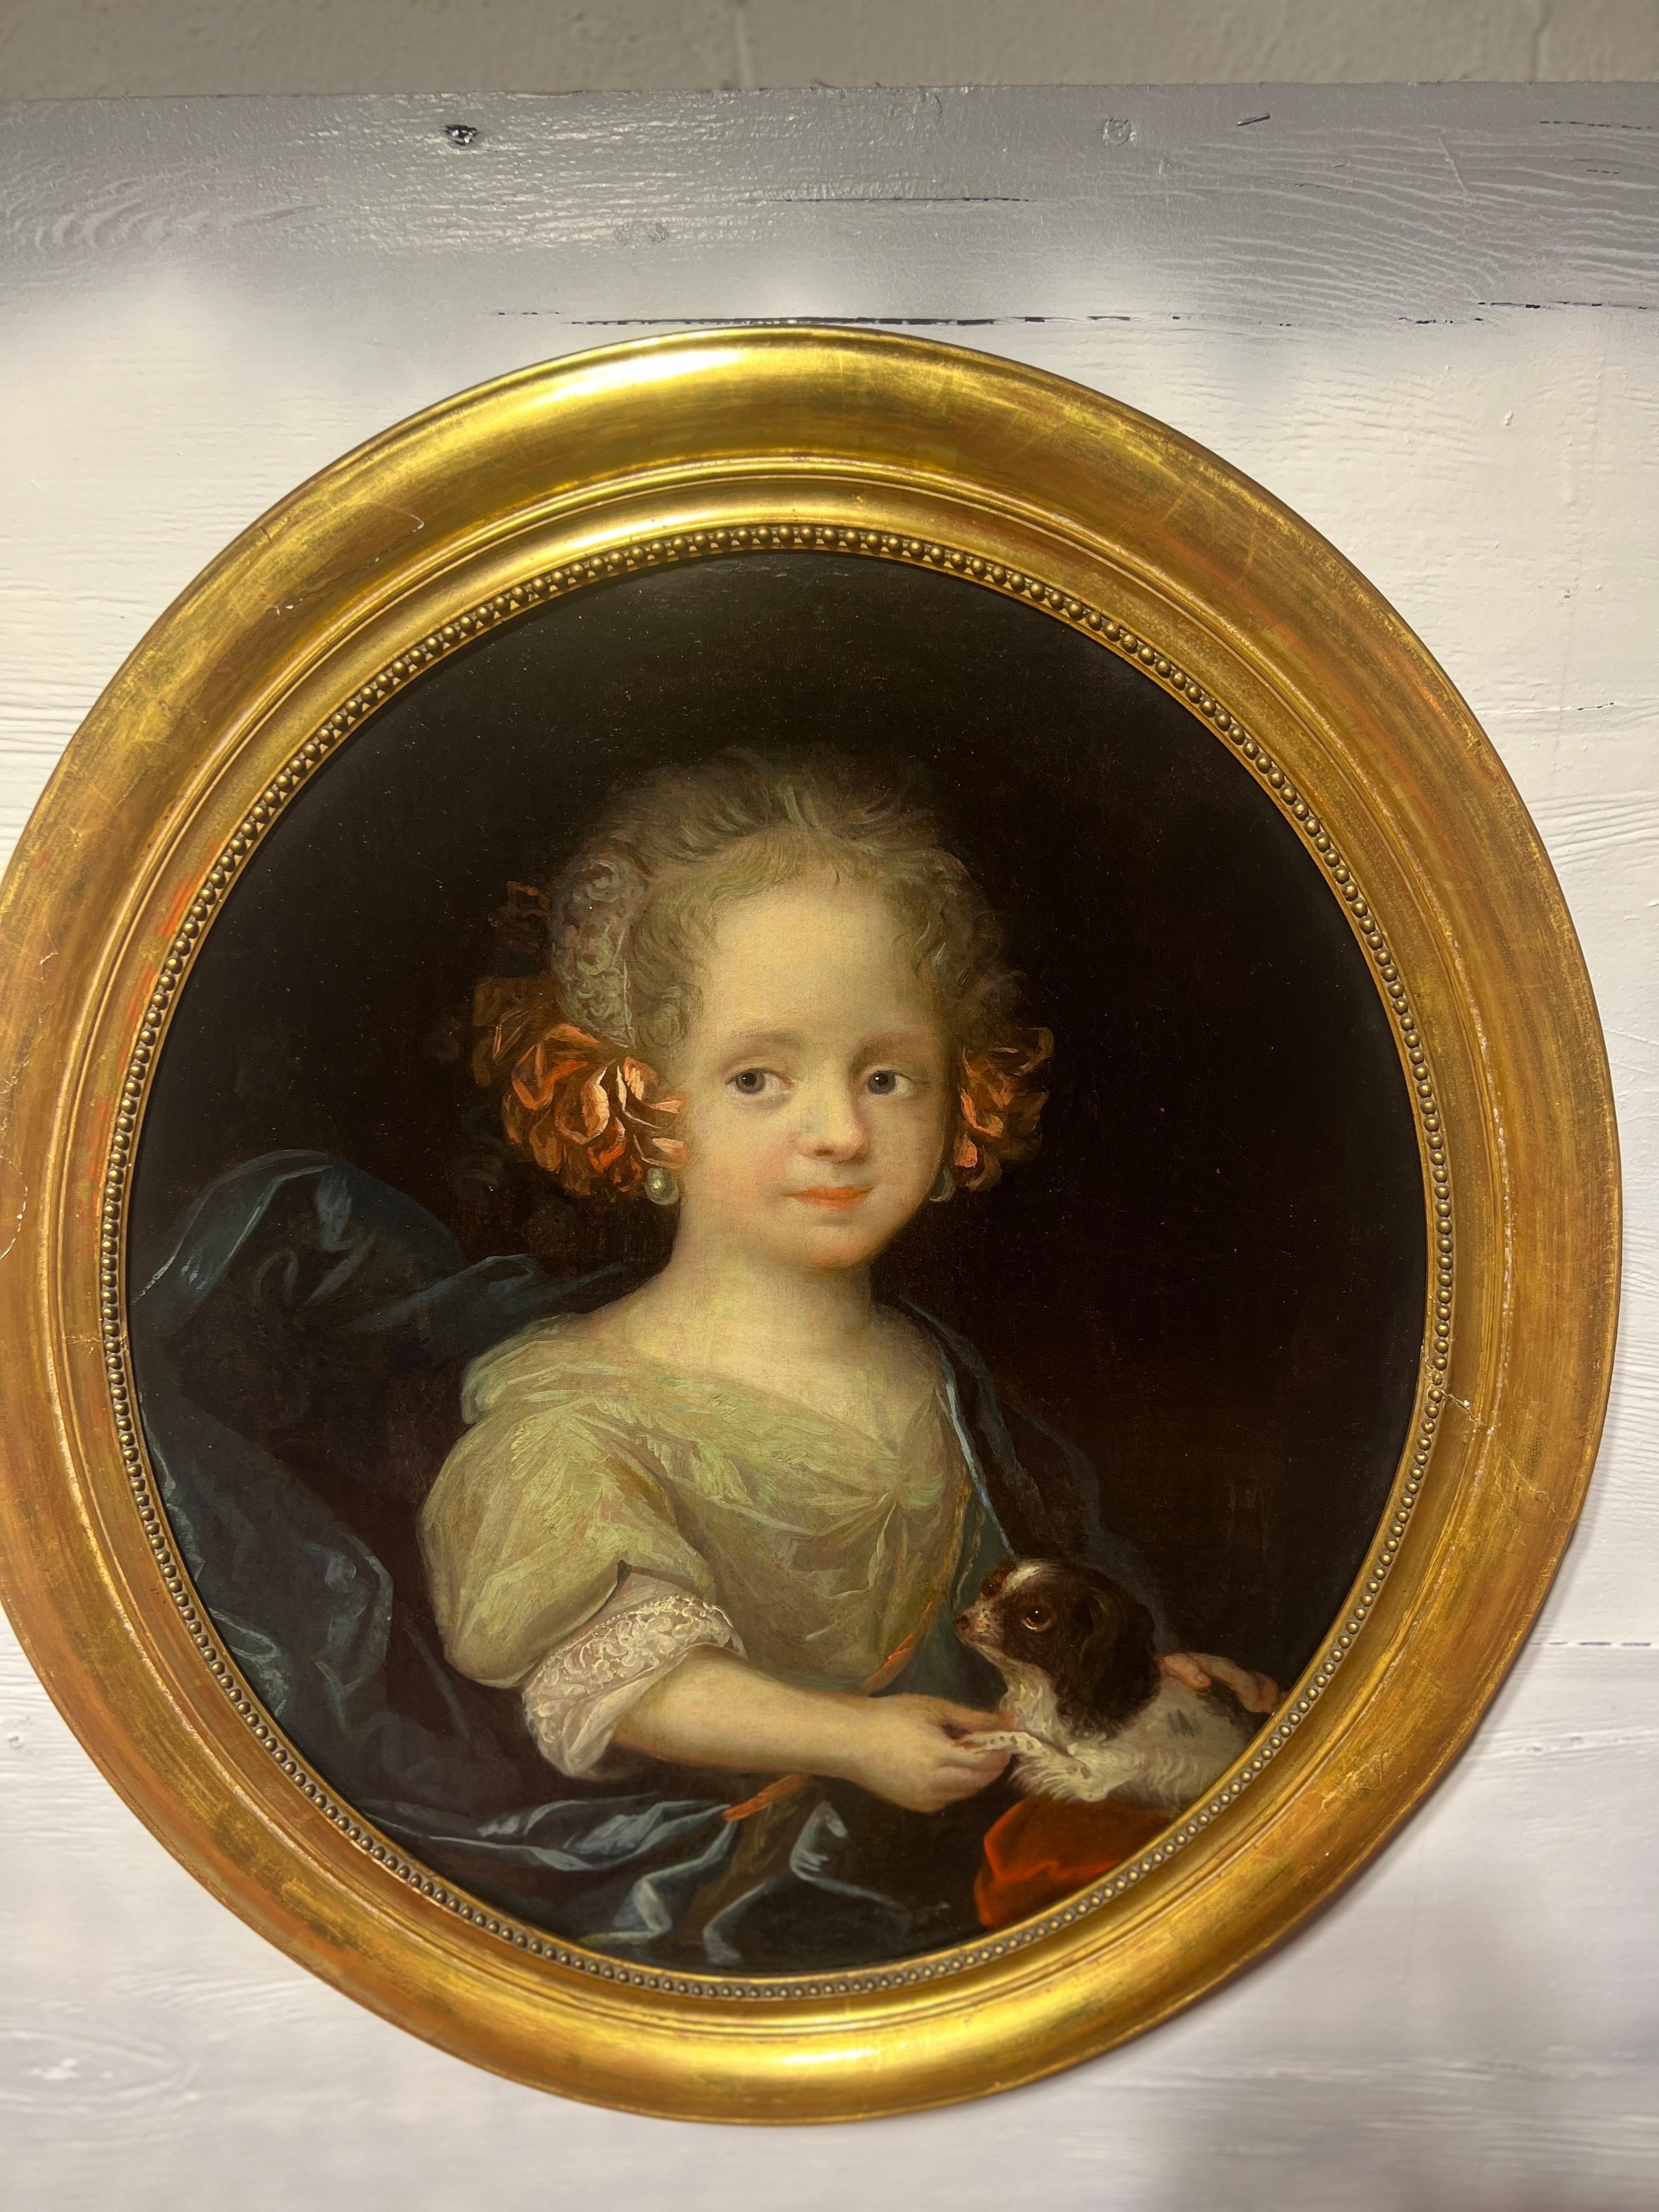 The 18th Century French Portrait of a Young Girl and Dog, attributed to Vigée Le Brun, is a captivating and tender representation of the era's portraiture. This exquisite painting showcases the artist's skill in capturing the beauty and innocence of